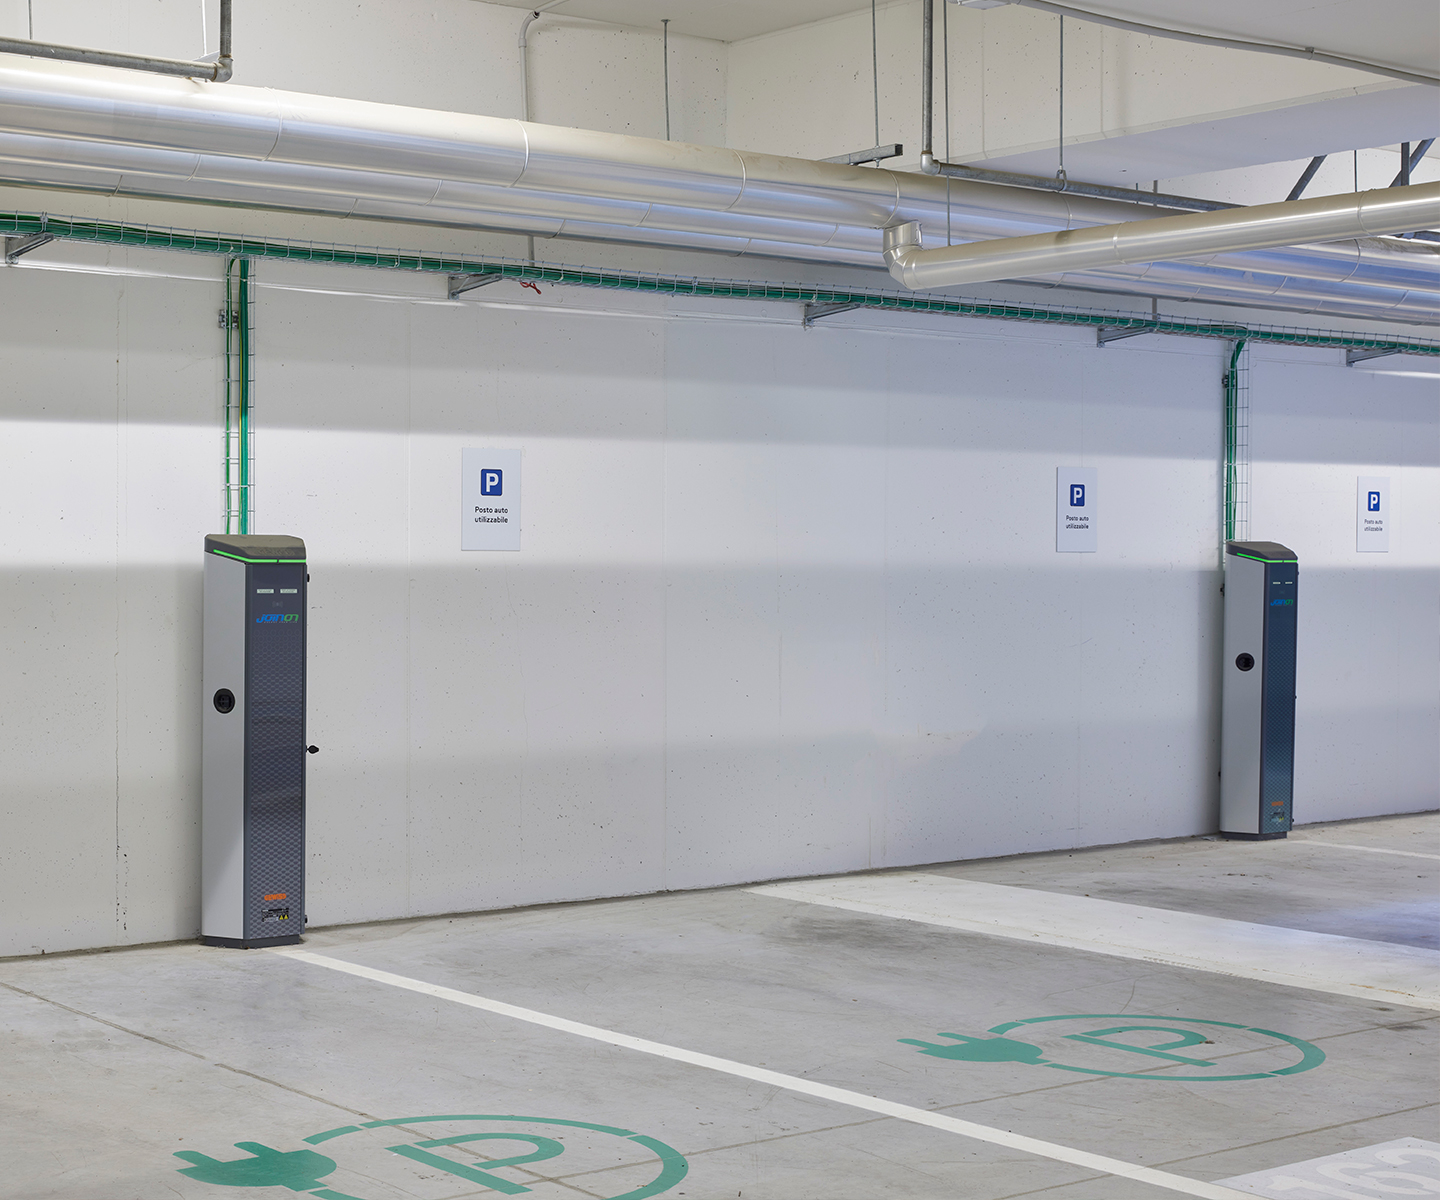 Installation of Joinon I-ON in the parking area of Galeazzi-Sant'Ambrogio Hospital.